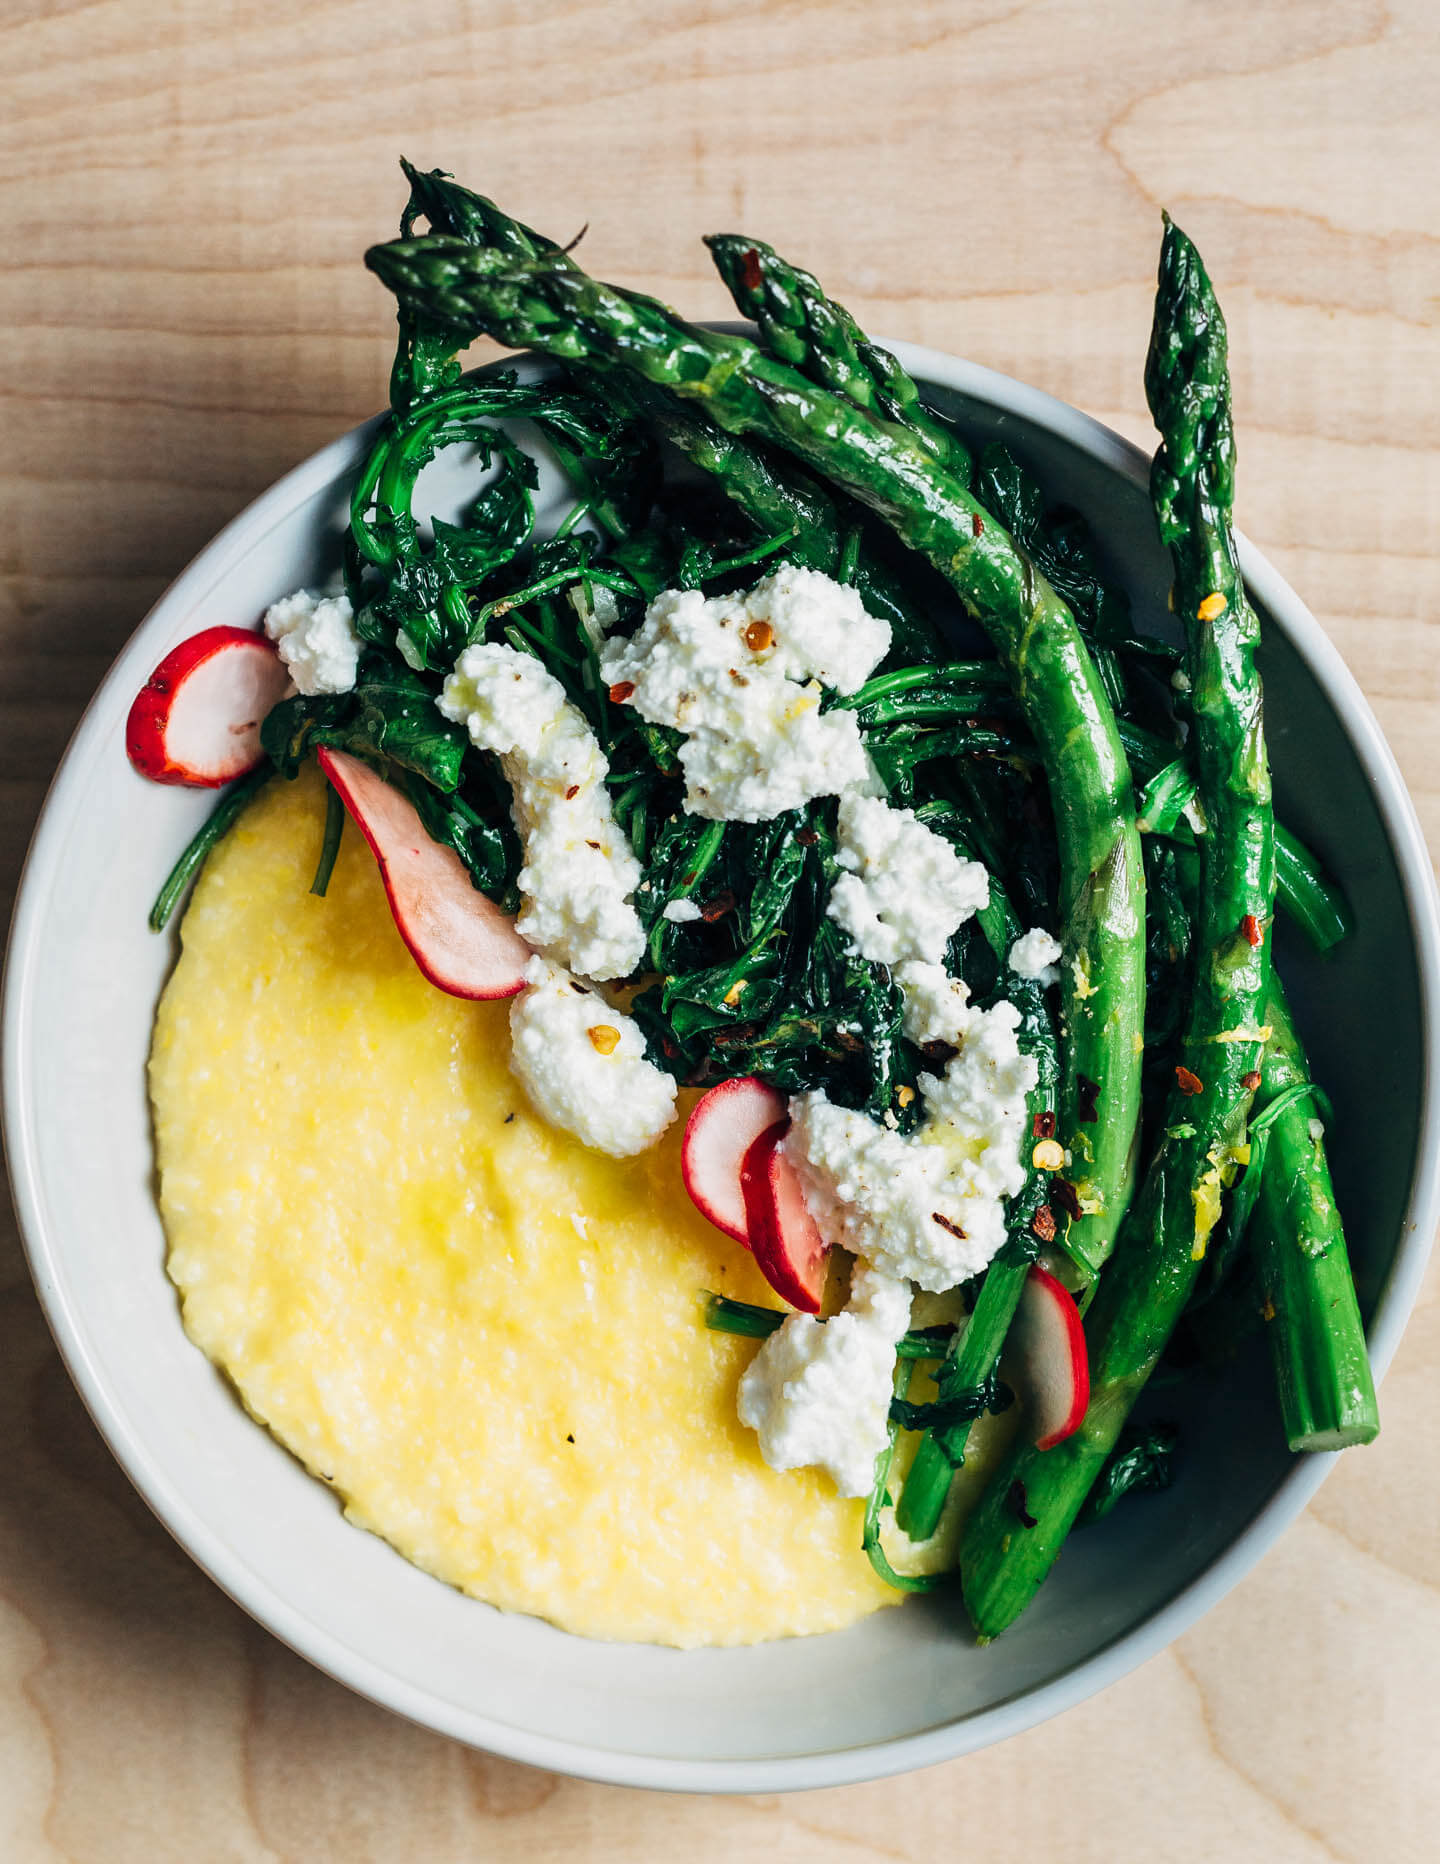 These versatile asparagus polenta bowls are a study in contrasting flavors and textures. Buttery polenta counters the bitter notes of spring greens and asparagus, while creamy ricotta tempers the heat of red pepper flakes and young garlic. 